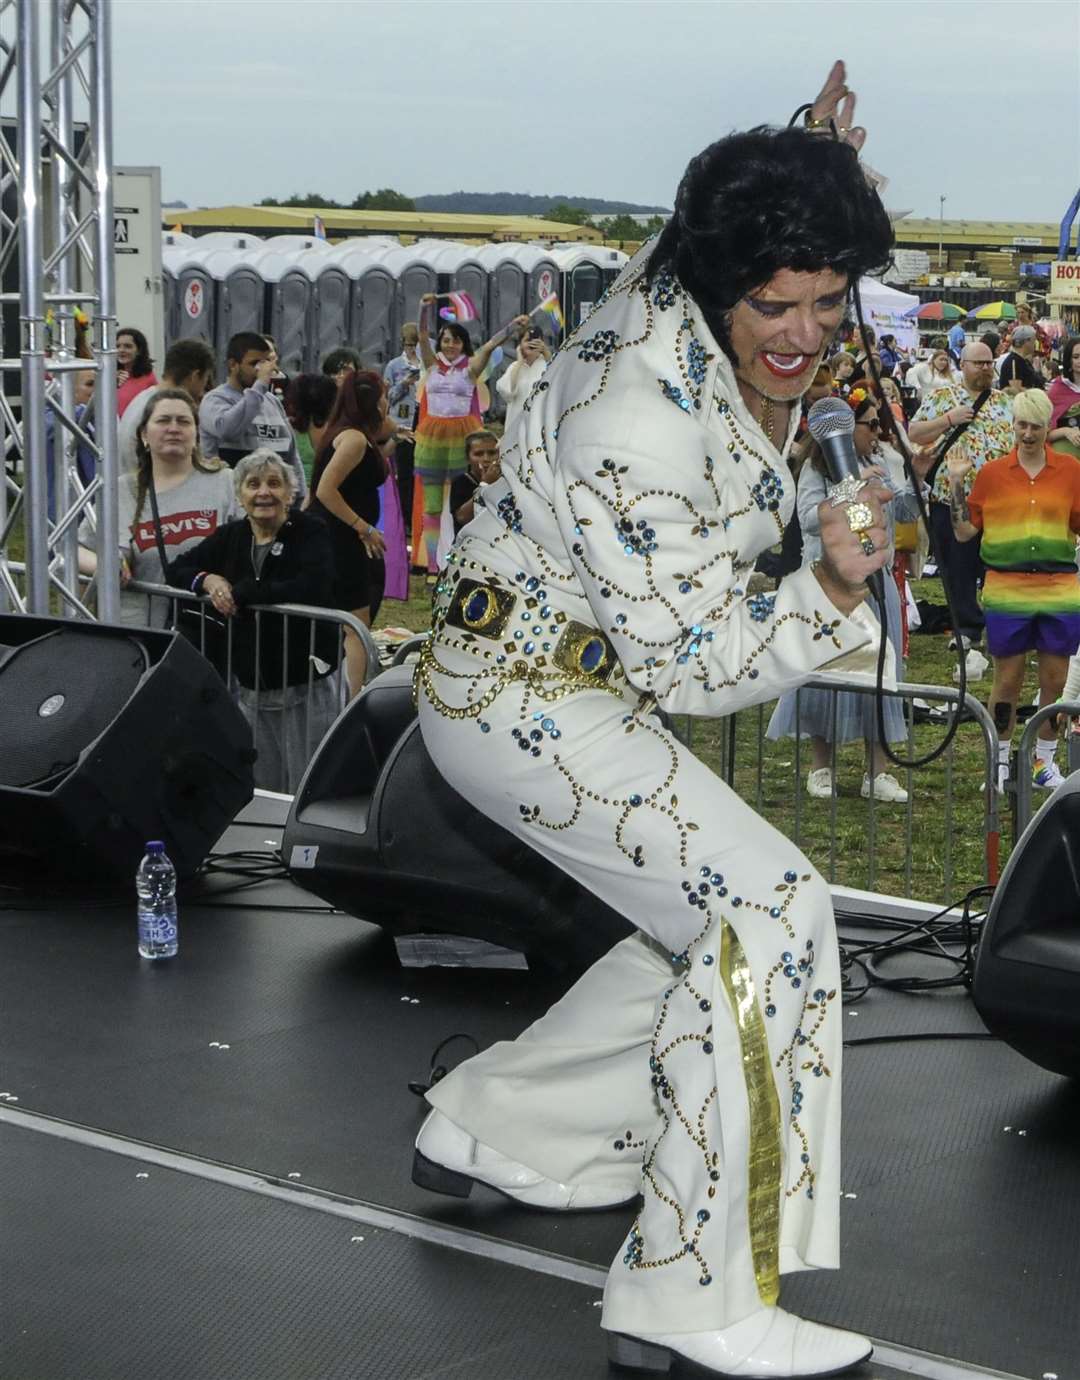 Elbrace, aka Gay Elvis entertains the crowd at a previous Medway Pride